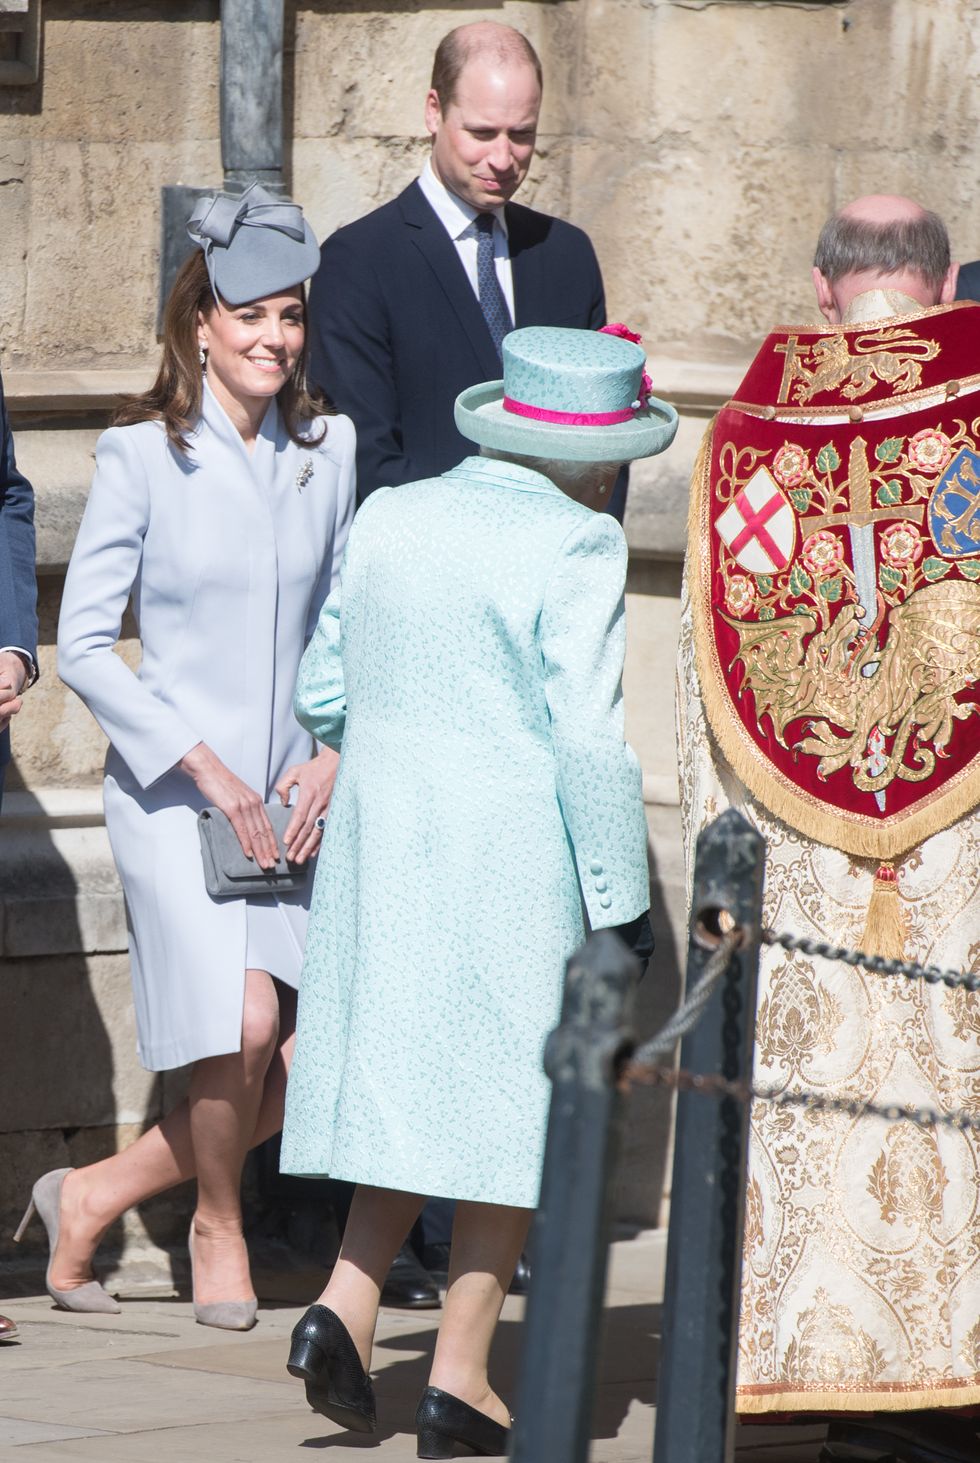 The Royal Family Attend Easter Service At St George's Chapel, Windsor